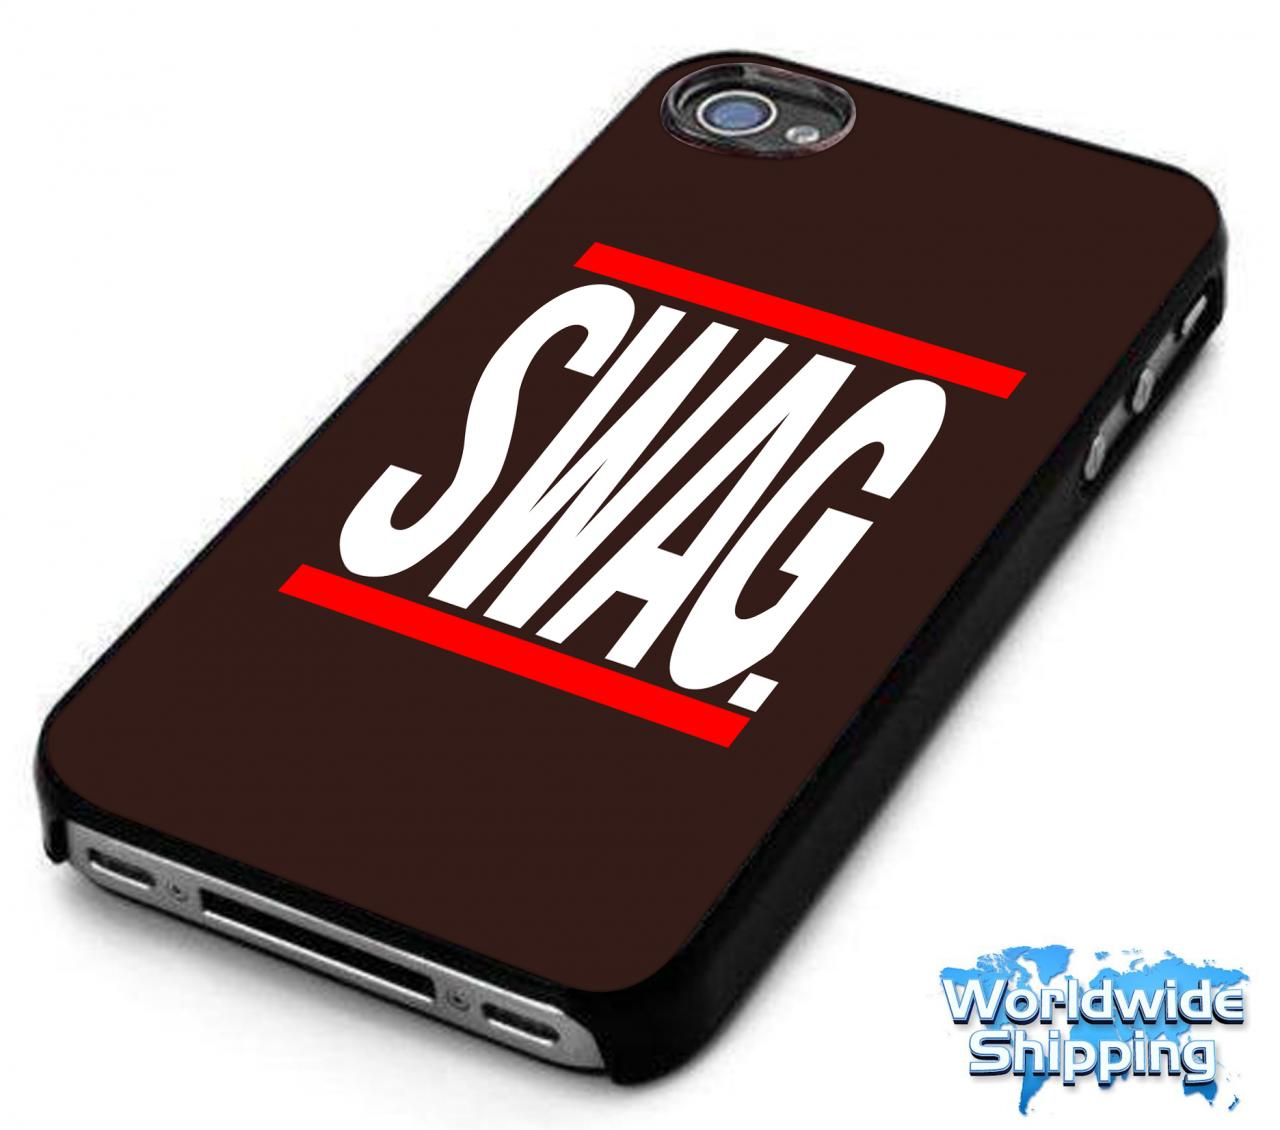 Swag Jersey Cover Case For Apple Iphone 4 / 4s / 5 / 5s / 5c / 6 / 6 Plus